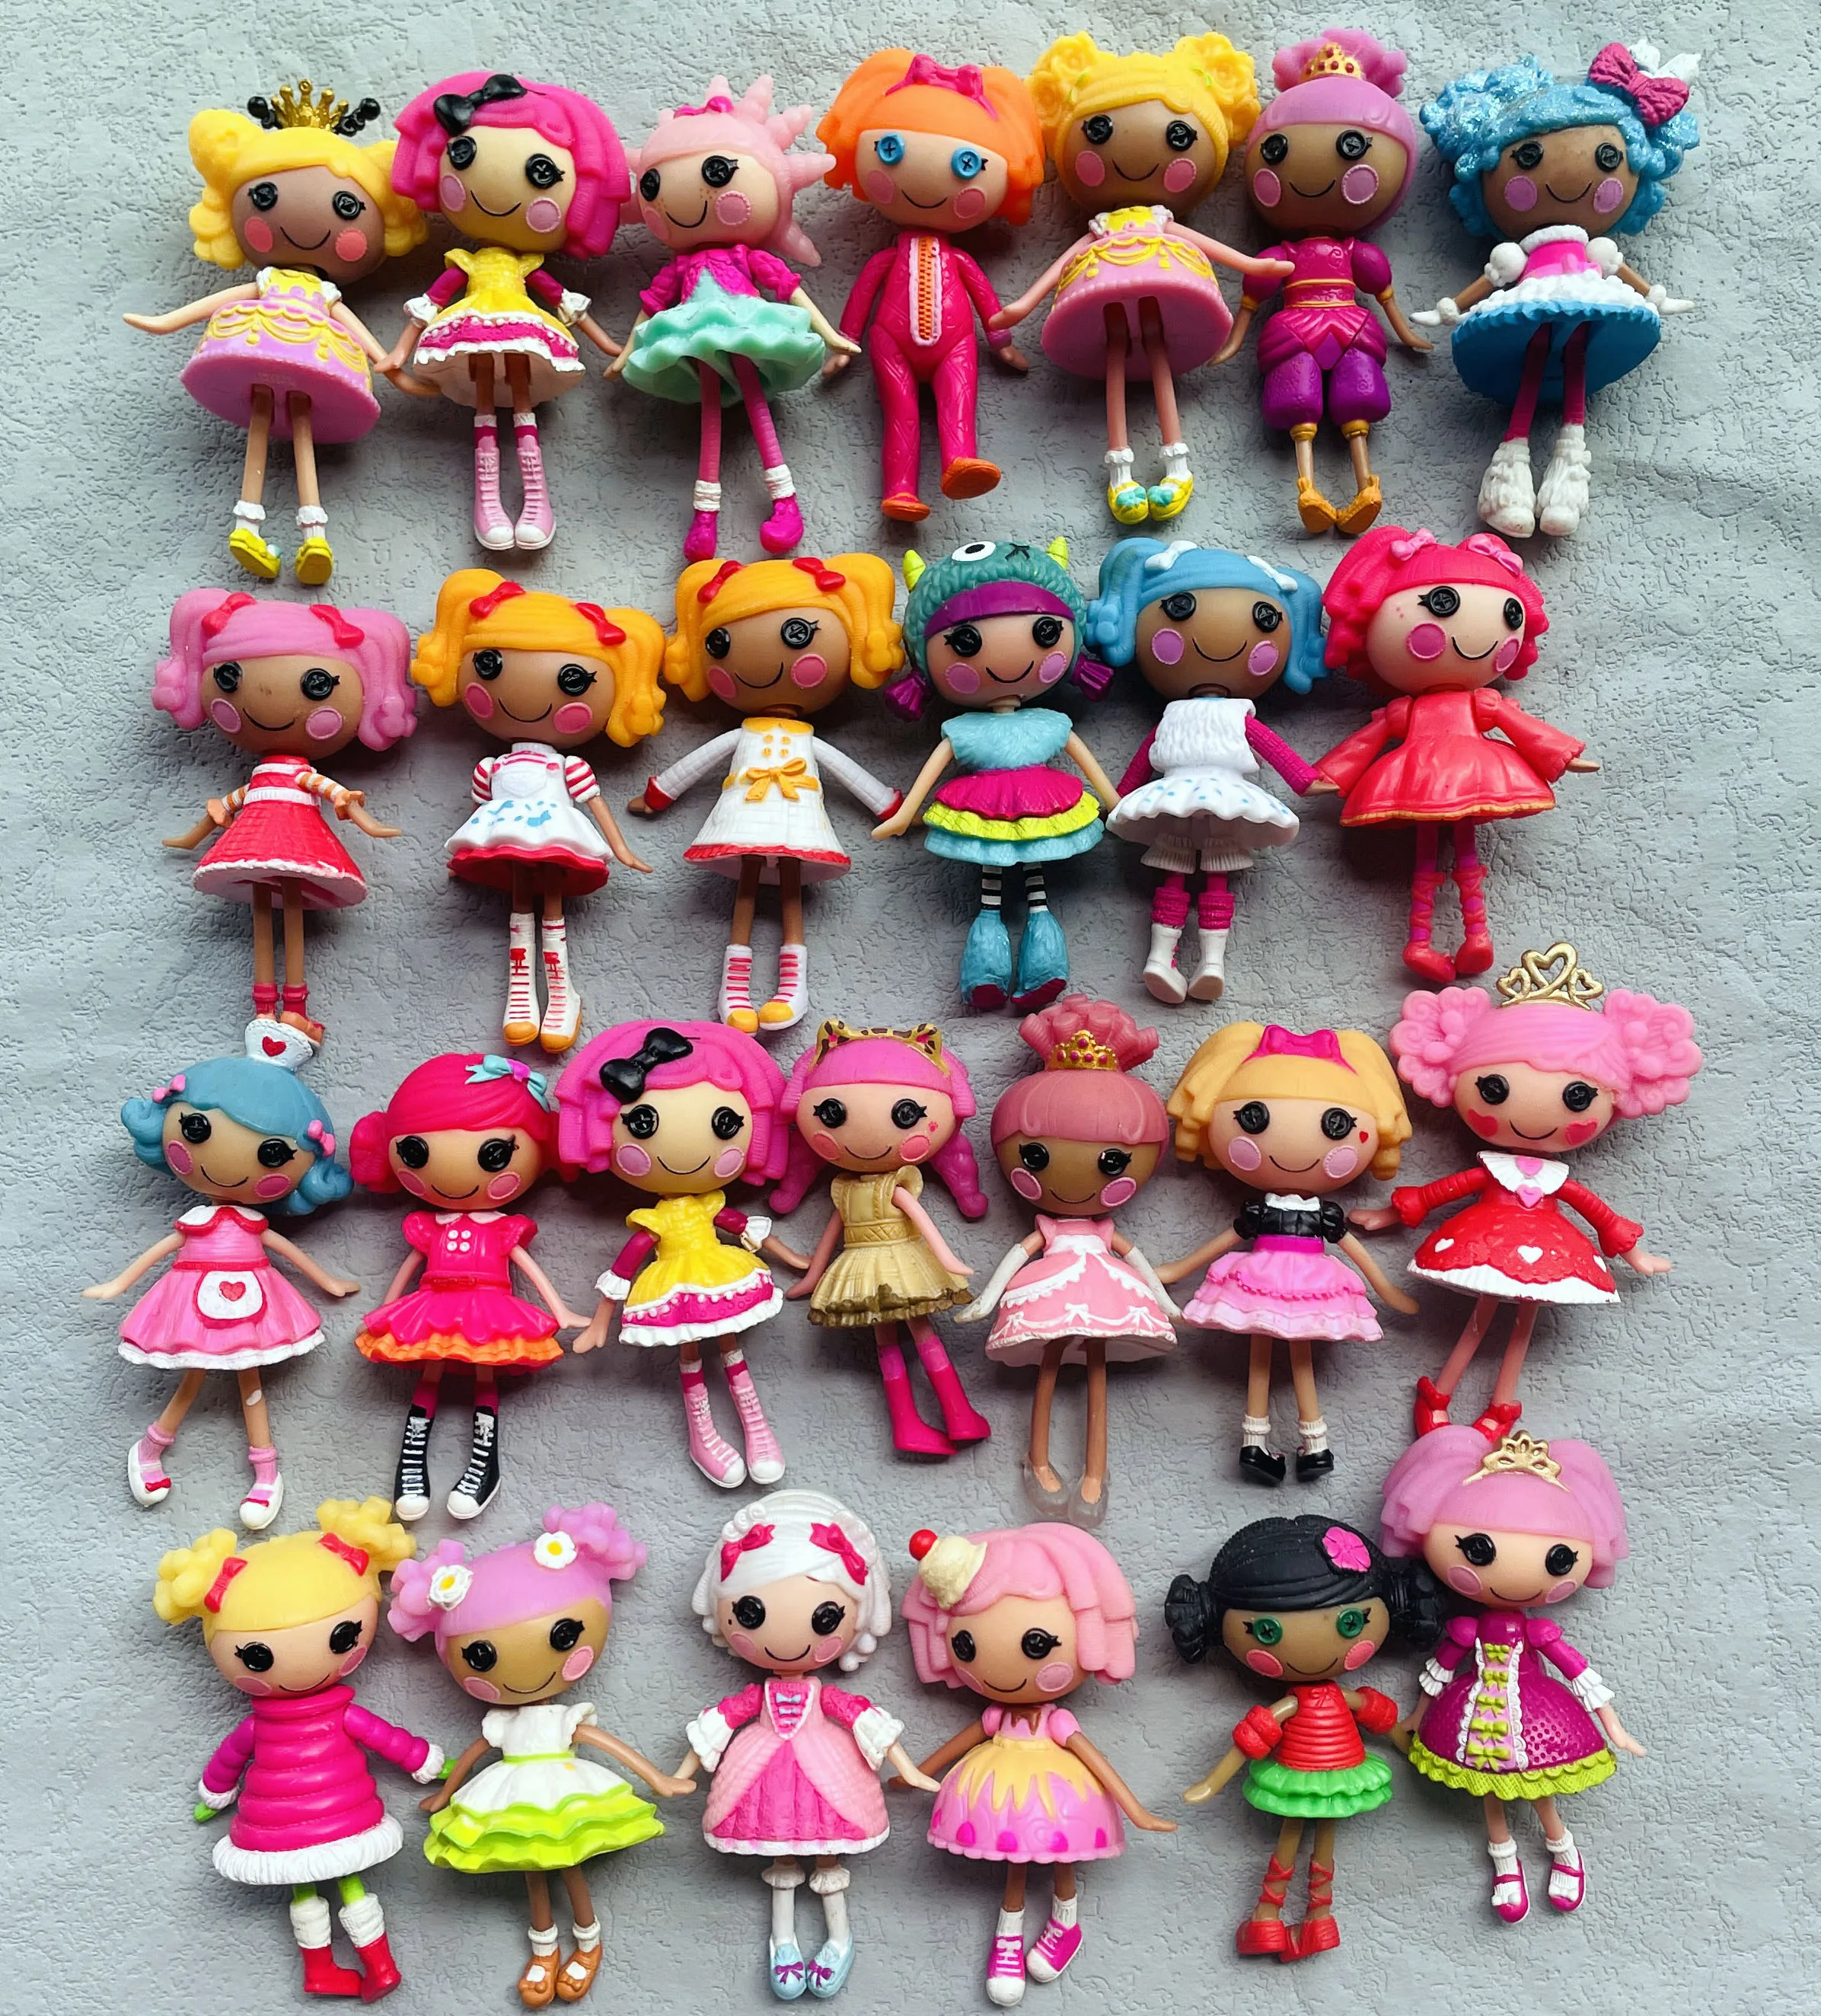 New  Original  7-8cm Lalaloopsy Little Sister Multi-style Dolls PVC Girls' Holiday Gift Collection Toys